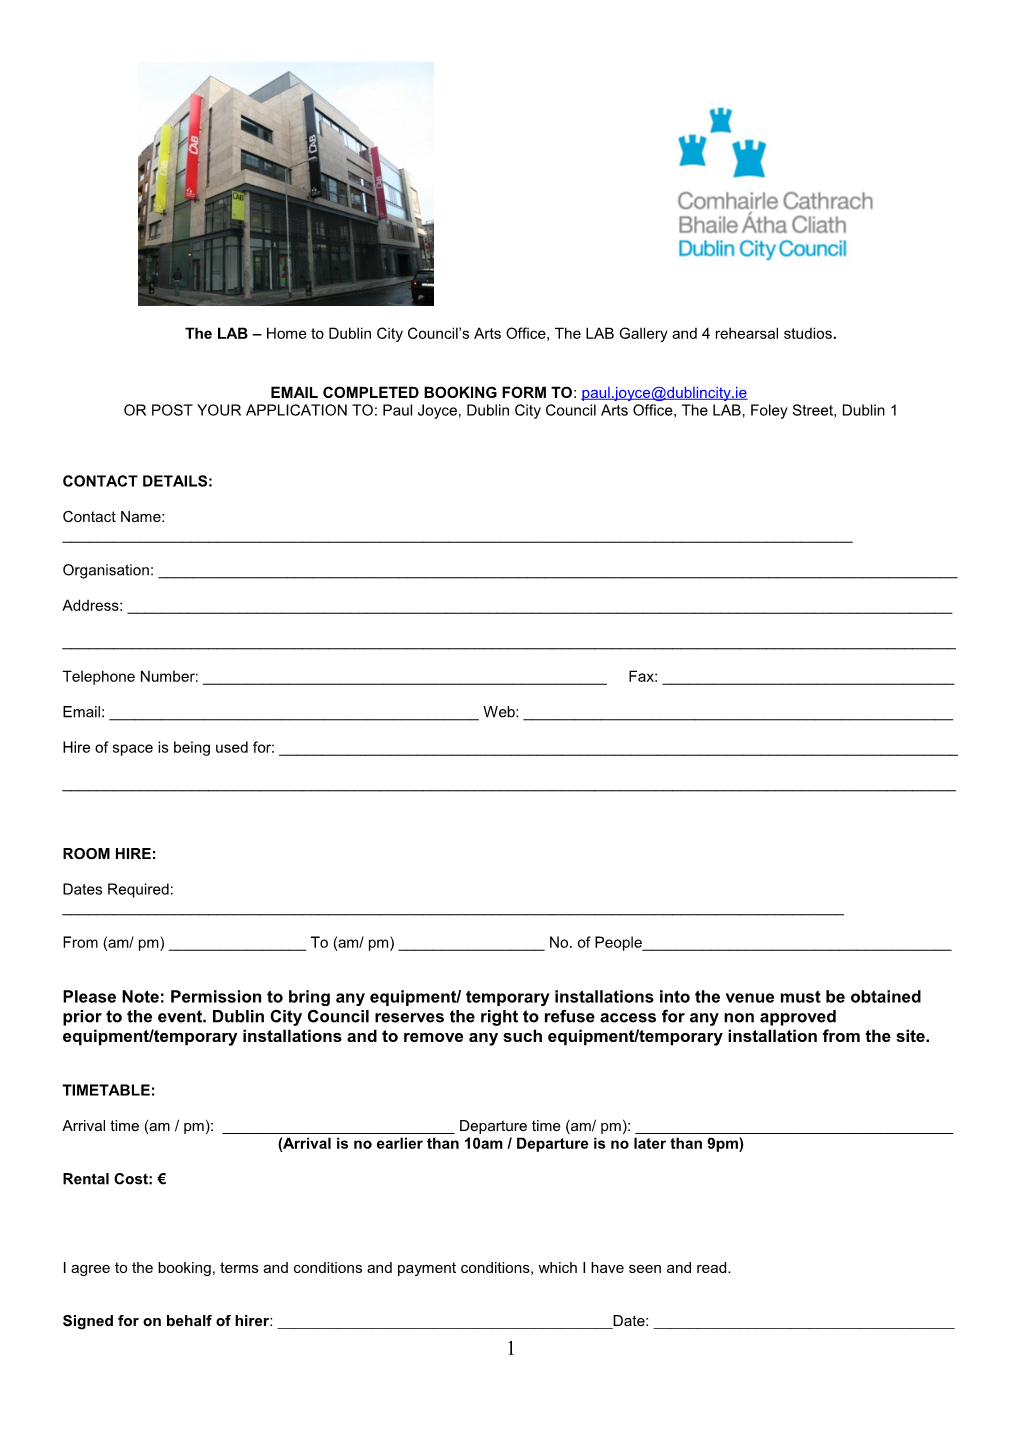 Wood Quay Venue City Wall Space Booking Form